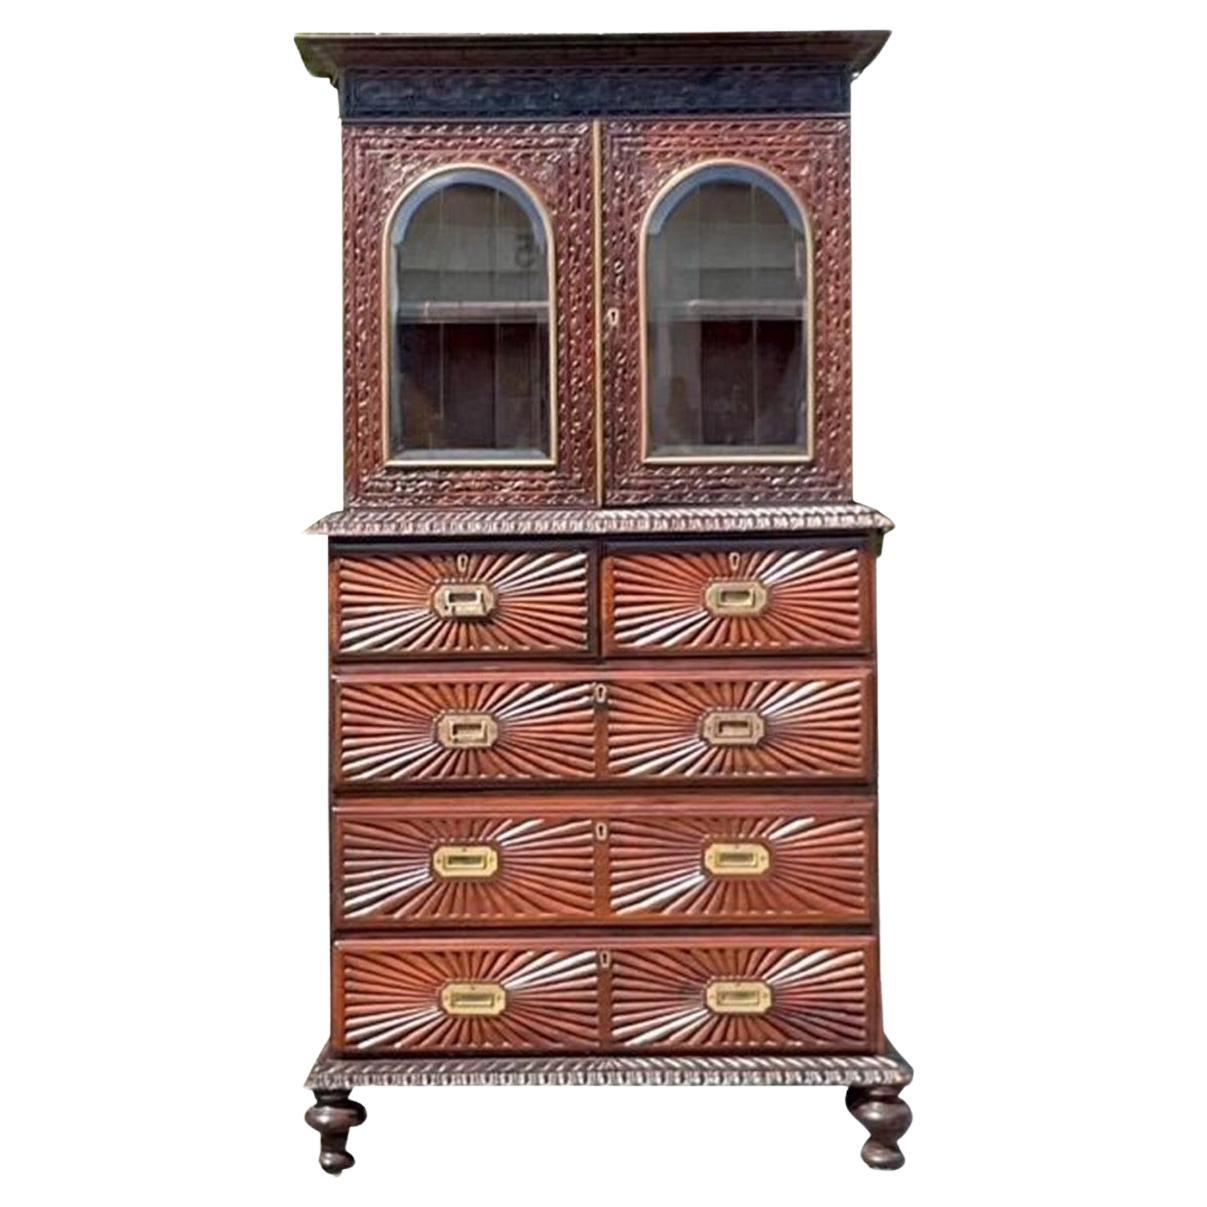 Early 20th Century Boho Anglo Indian Carved Sunburst Cabinet